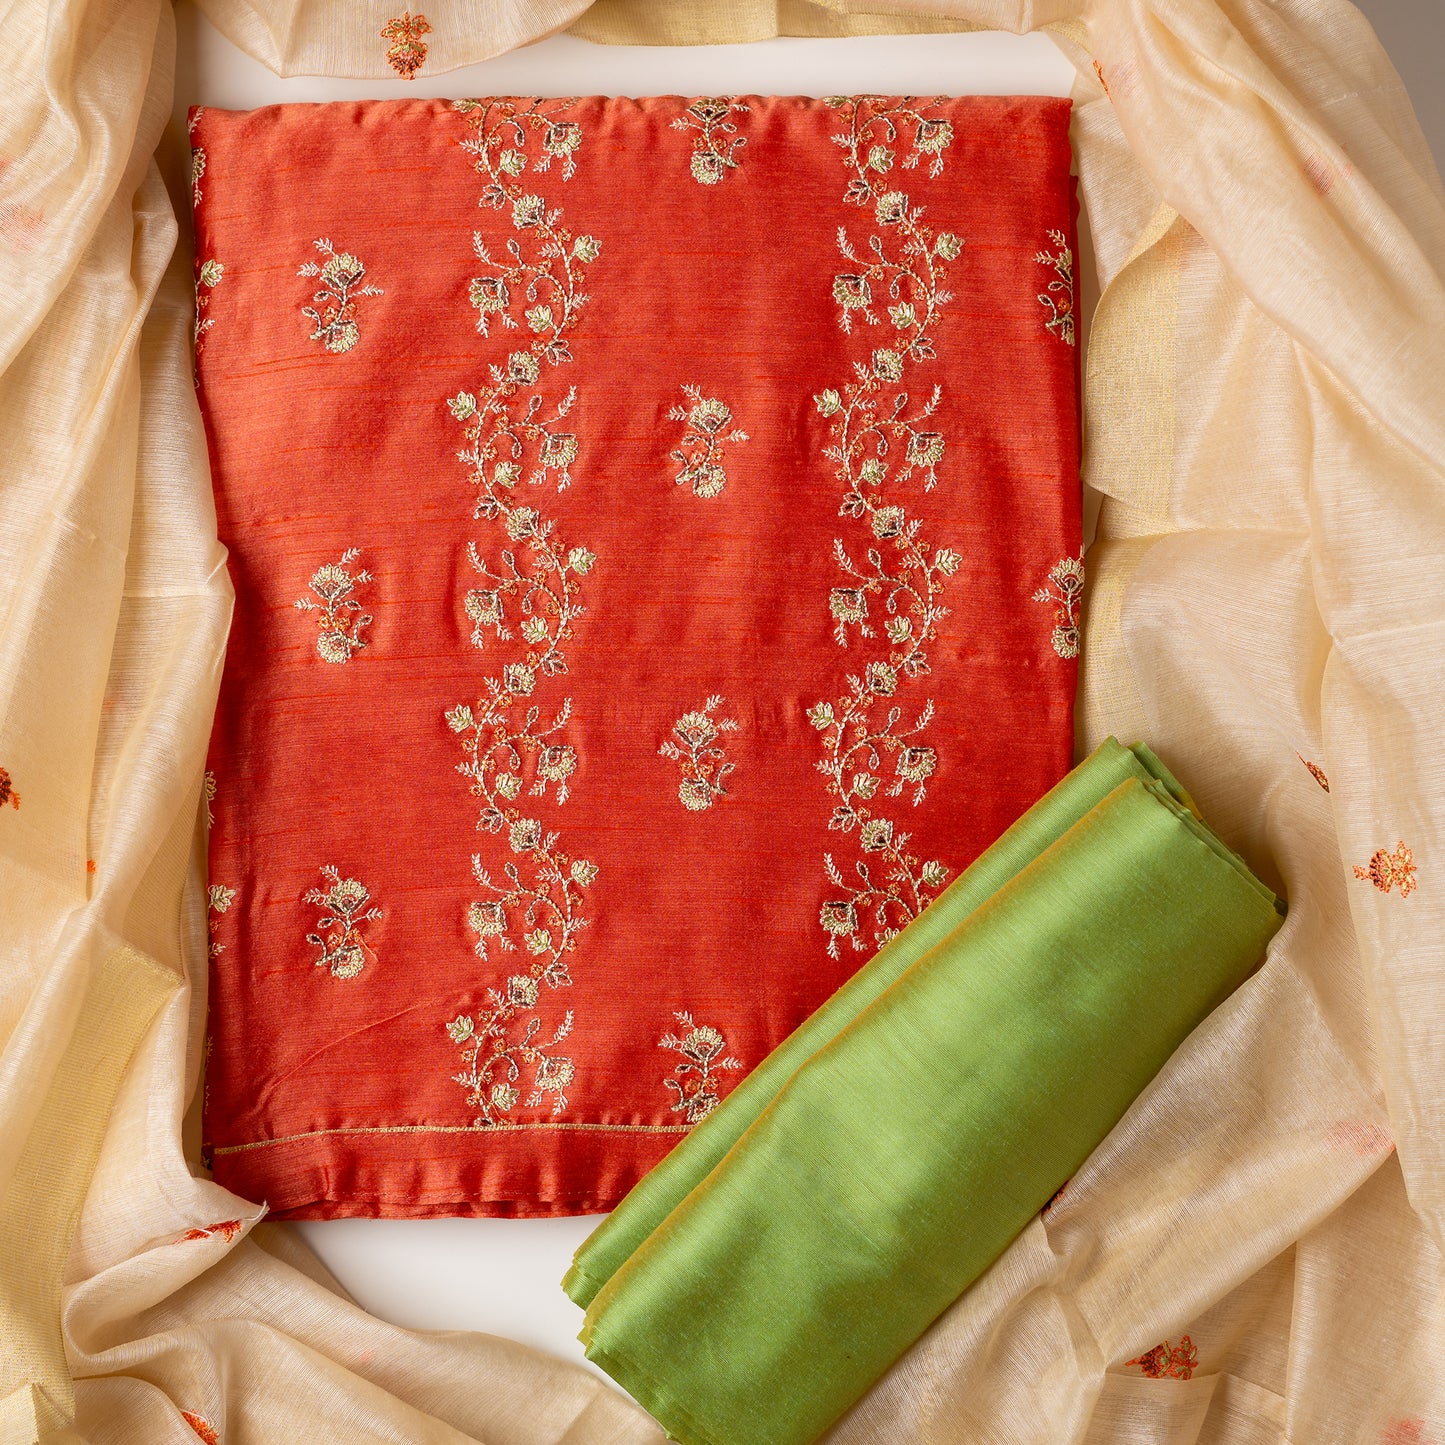 Unstitched chanderi silk dress material set, peach color chanderi silk top with embroidery work, cream color chanderi silk dupatta with embroidery work, parrot green color cotton silk bottom